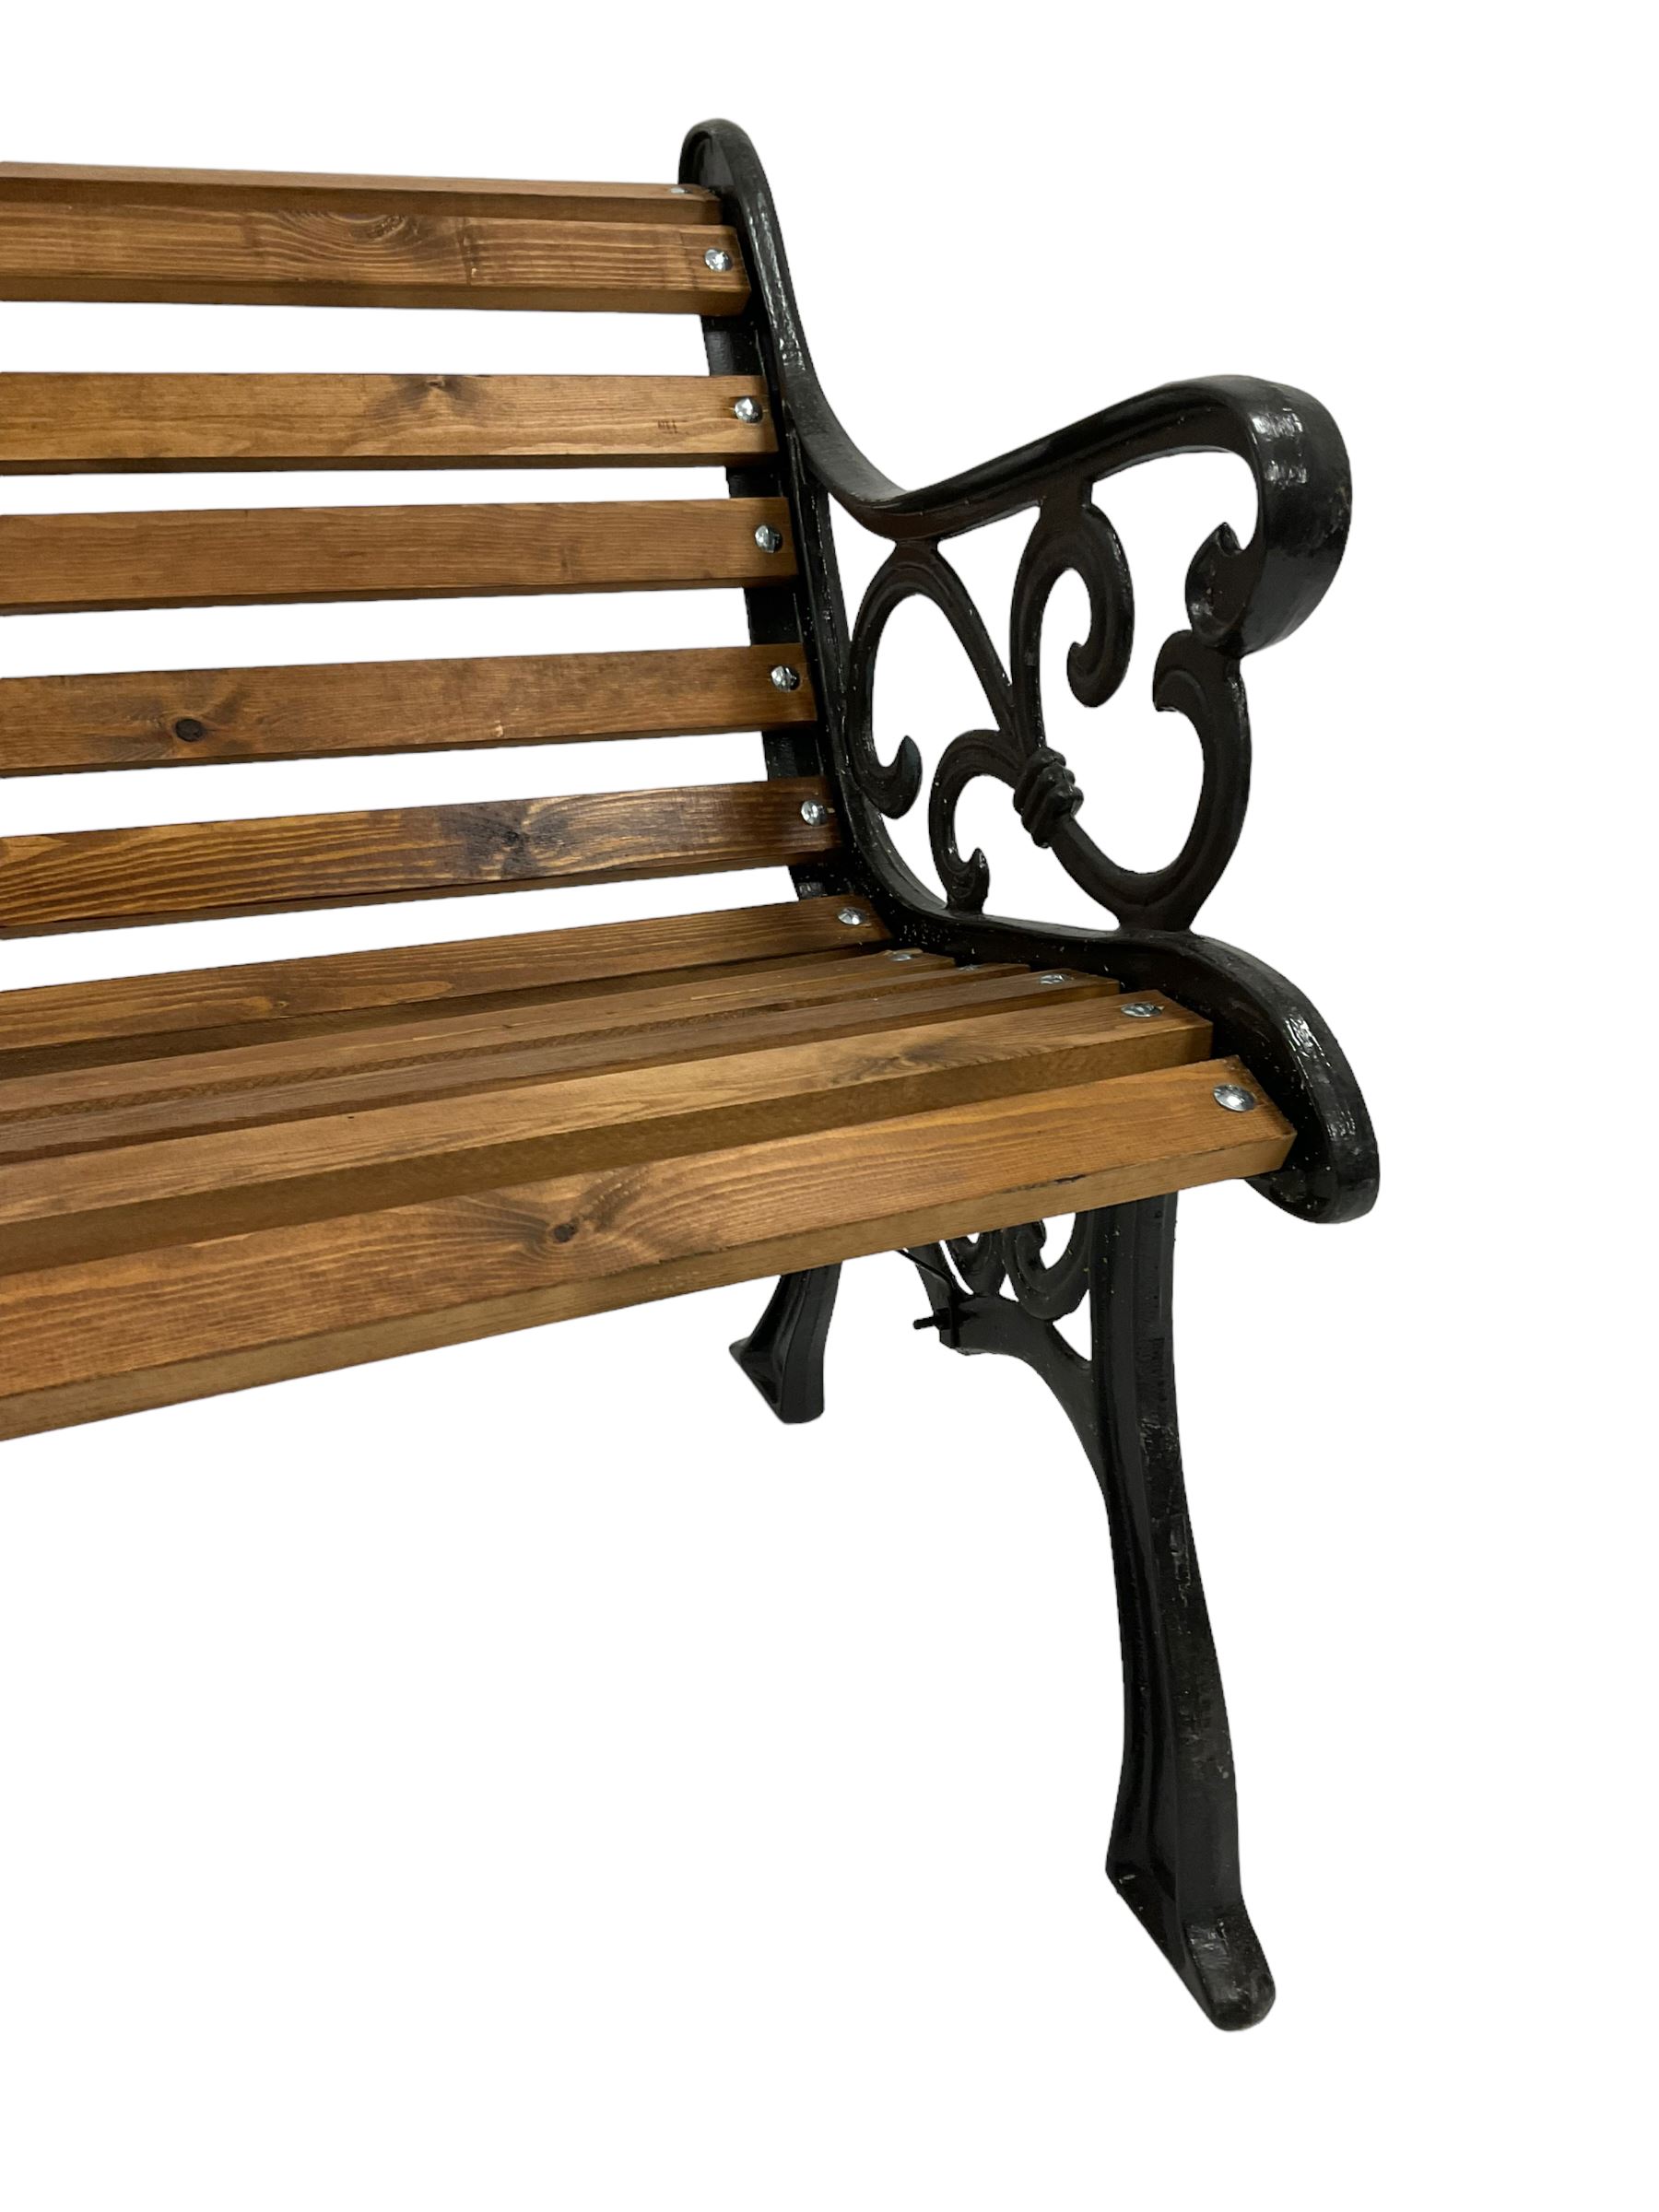 Black painted cast iron and wood slated garden bench - Image 2 of 4